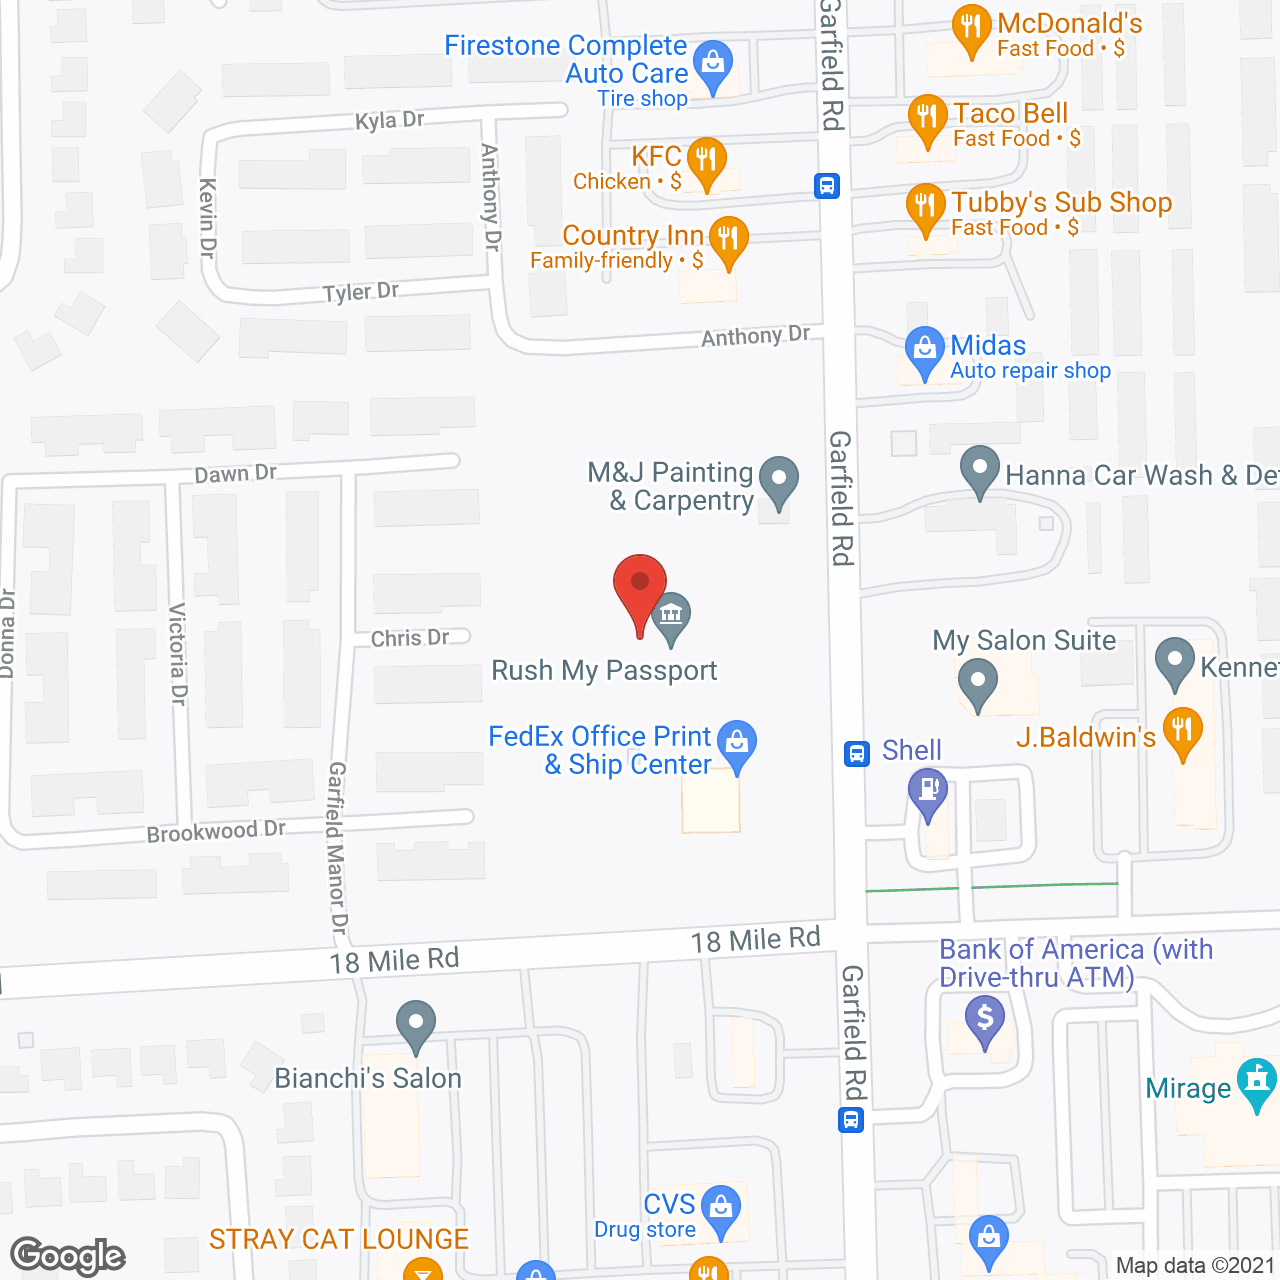 Guardian Angel Adult Family Home in google map